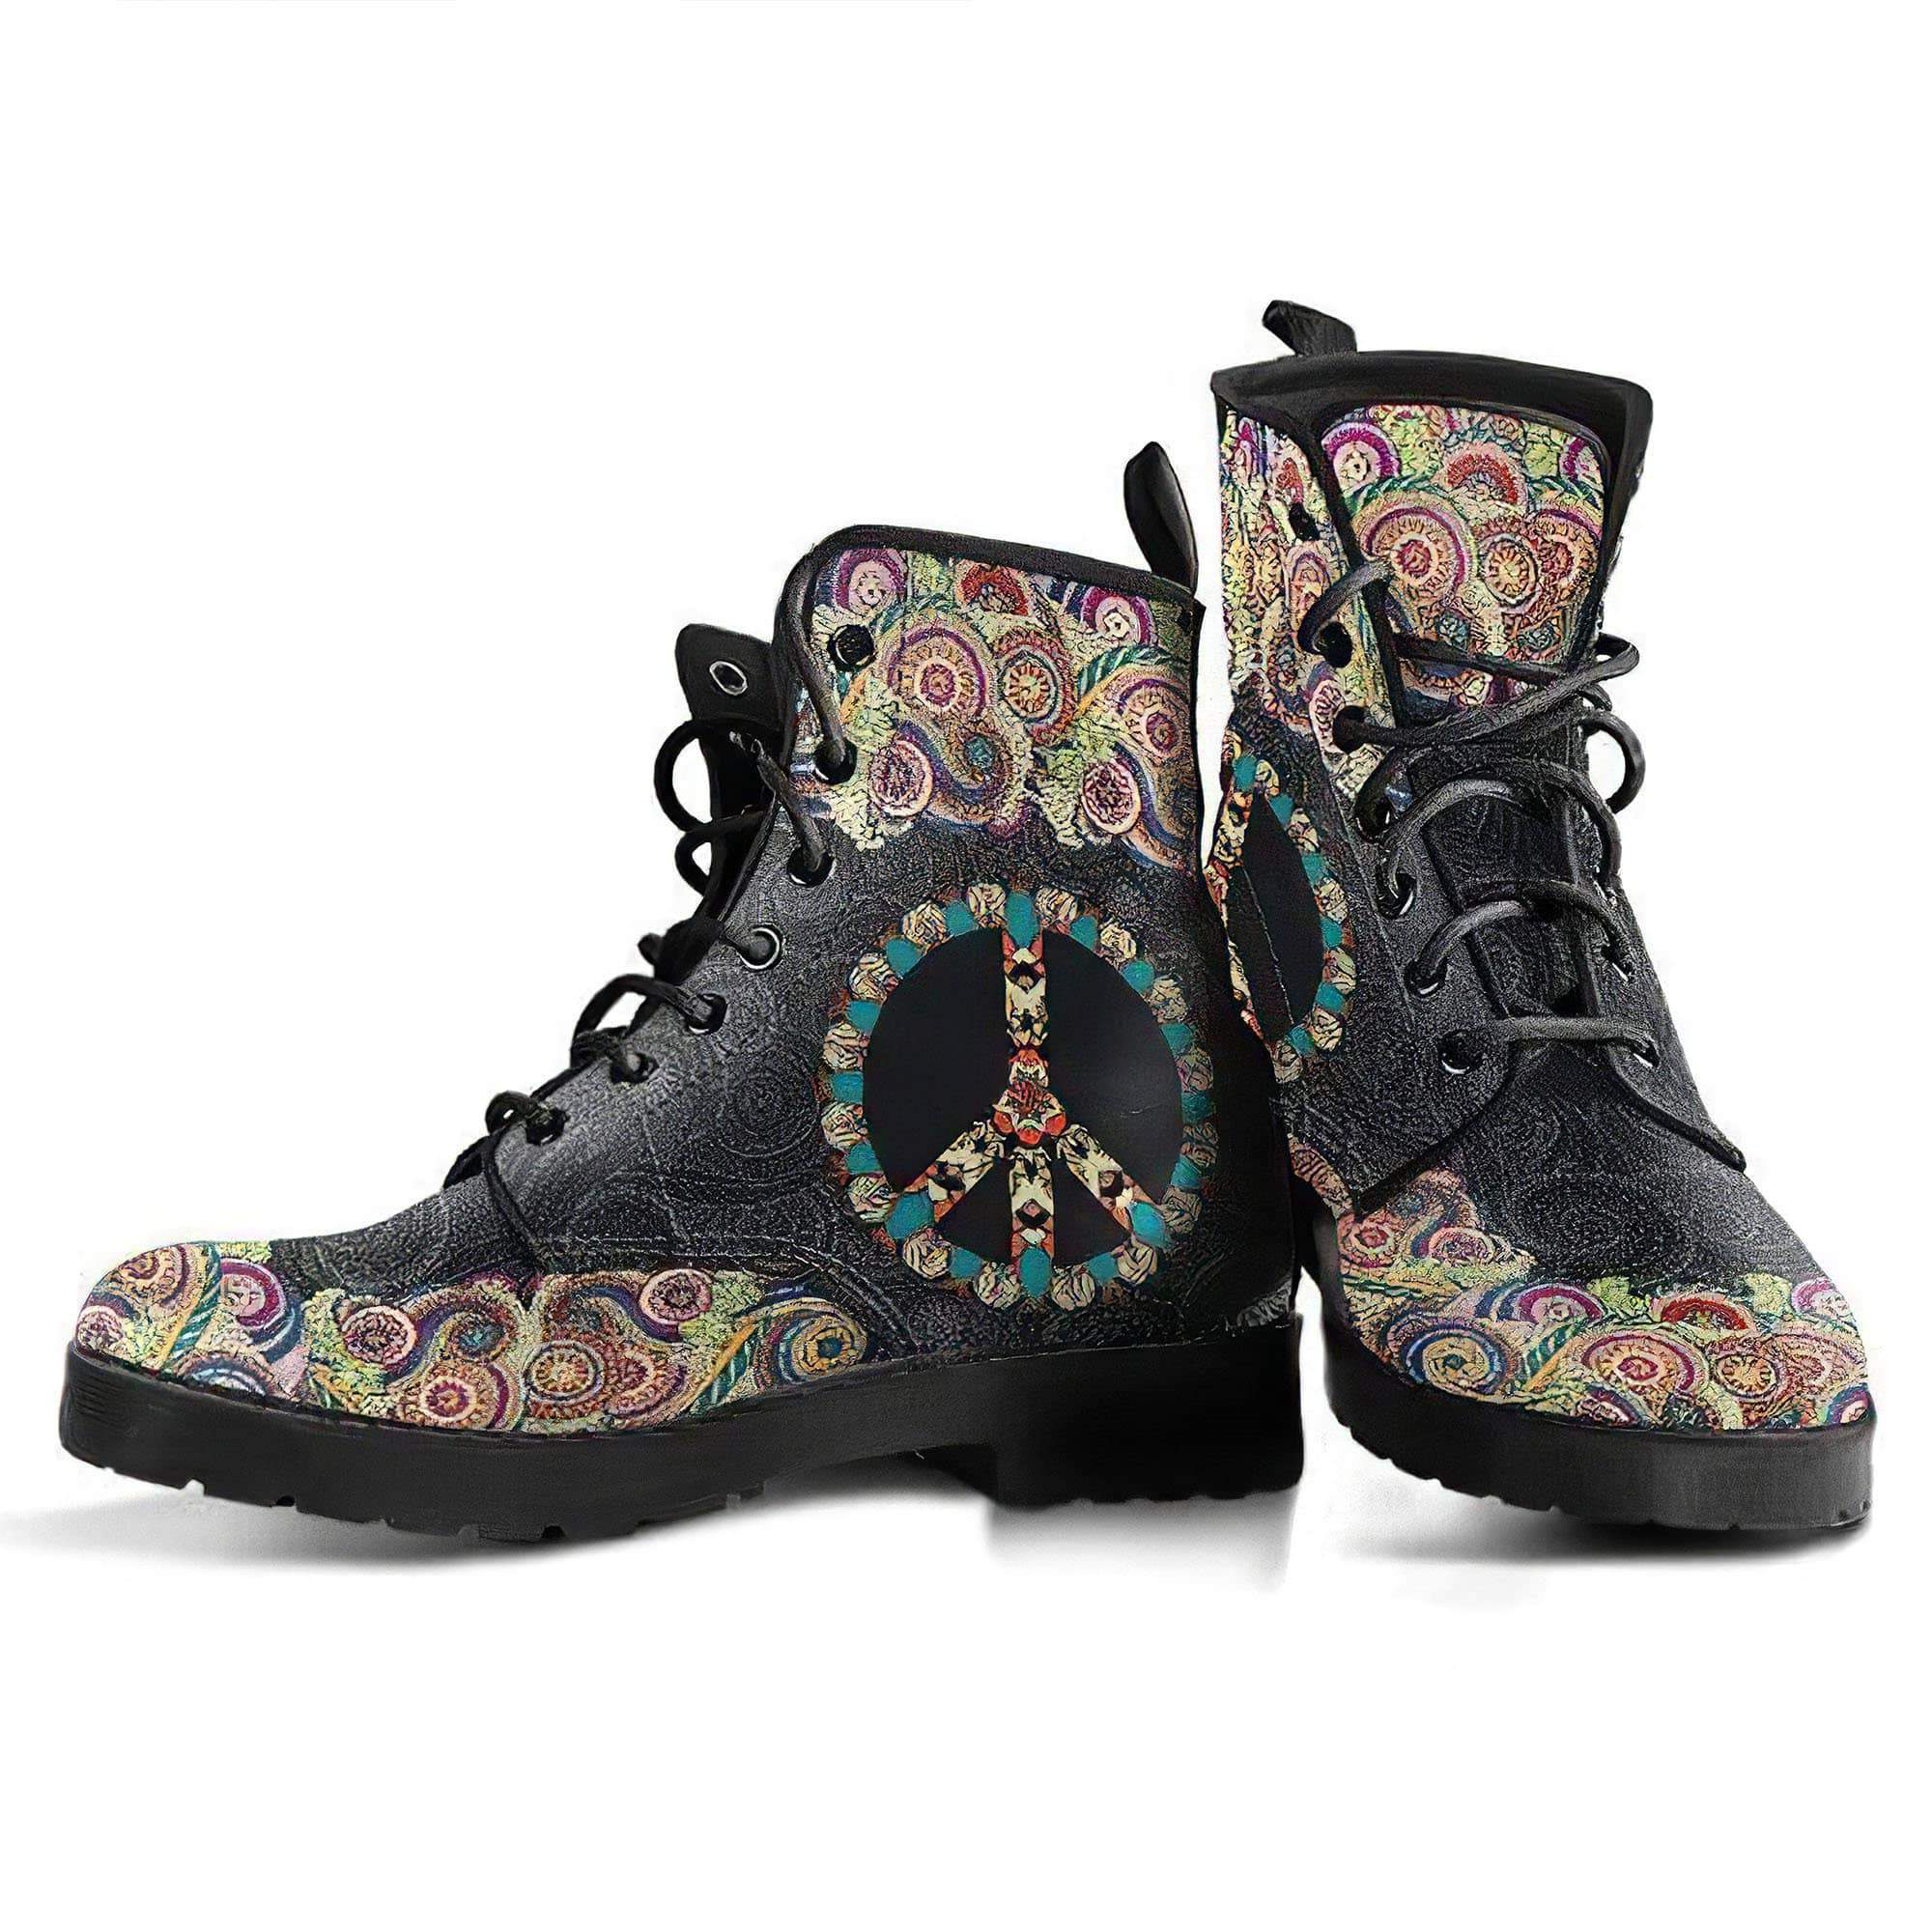 peace-mandala-black-handcrafted-boots-women-s-leather-boots-12051927236669.jpg